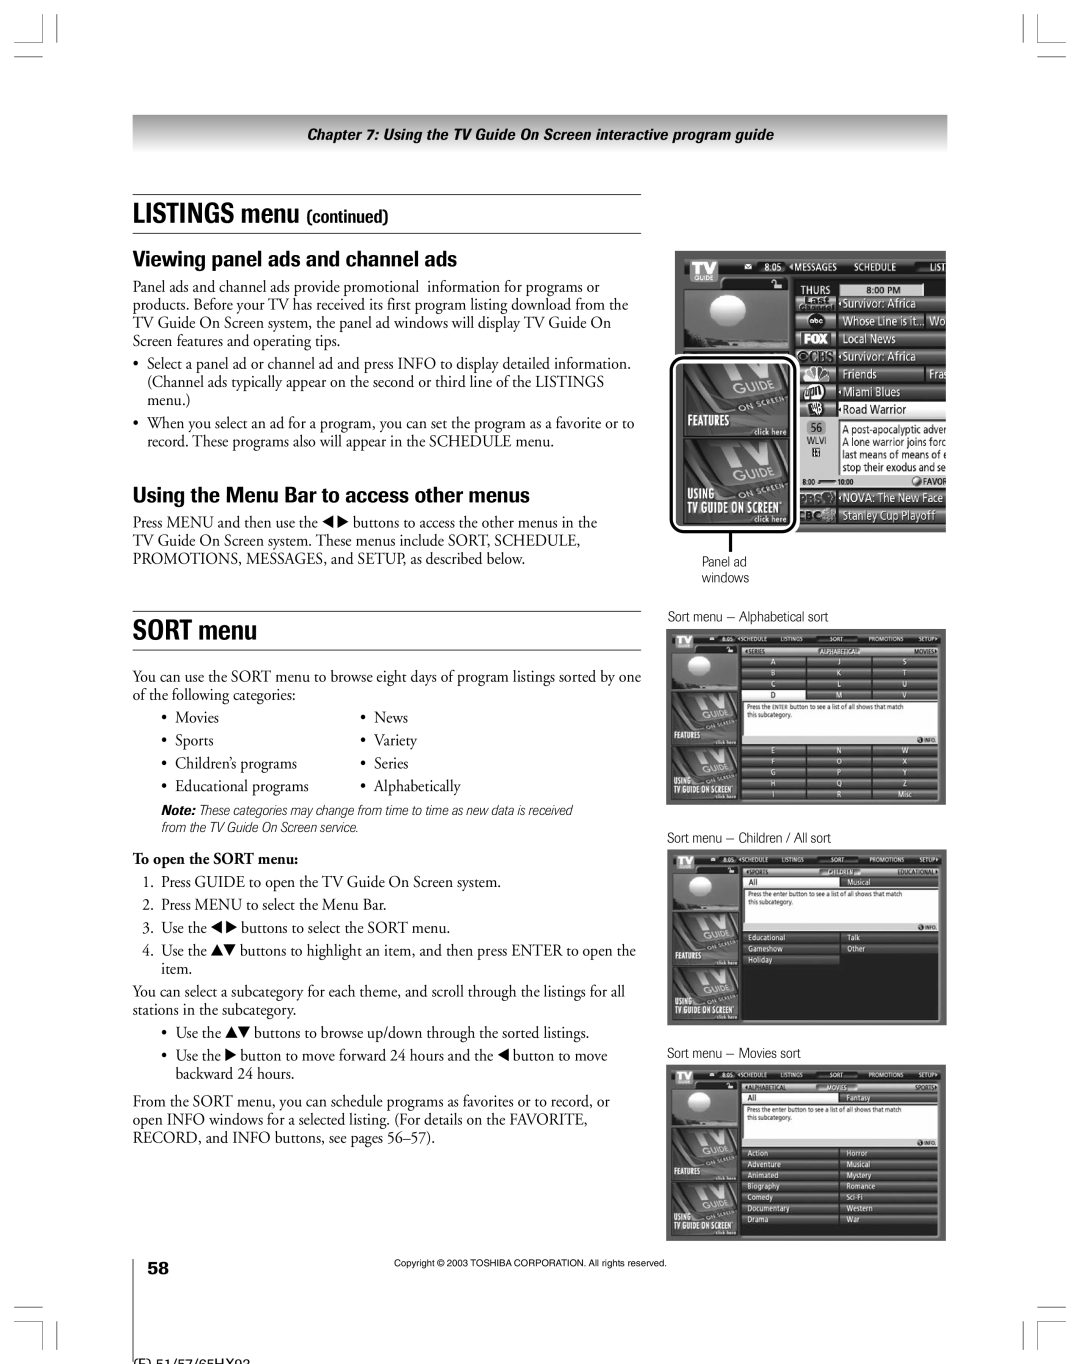 Toshiba 51HX93 owner manual SORT menu, Viewing panel ads and channel ads, Using the Menu Bar to access other menus 